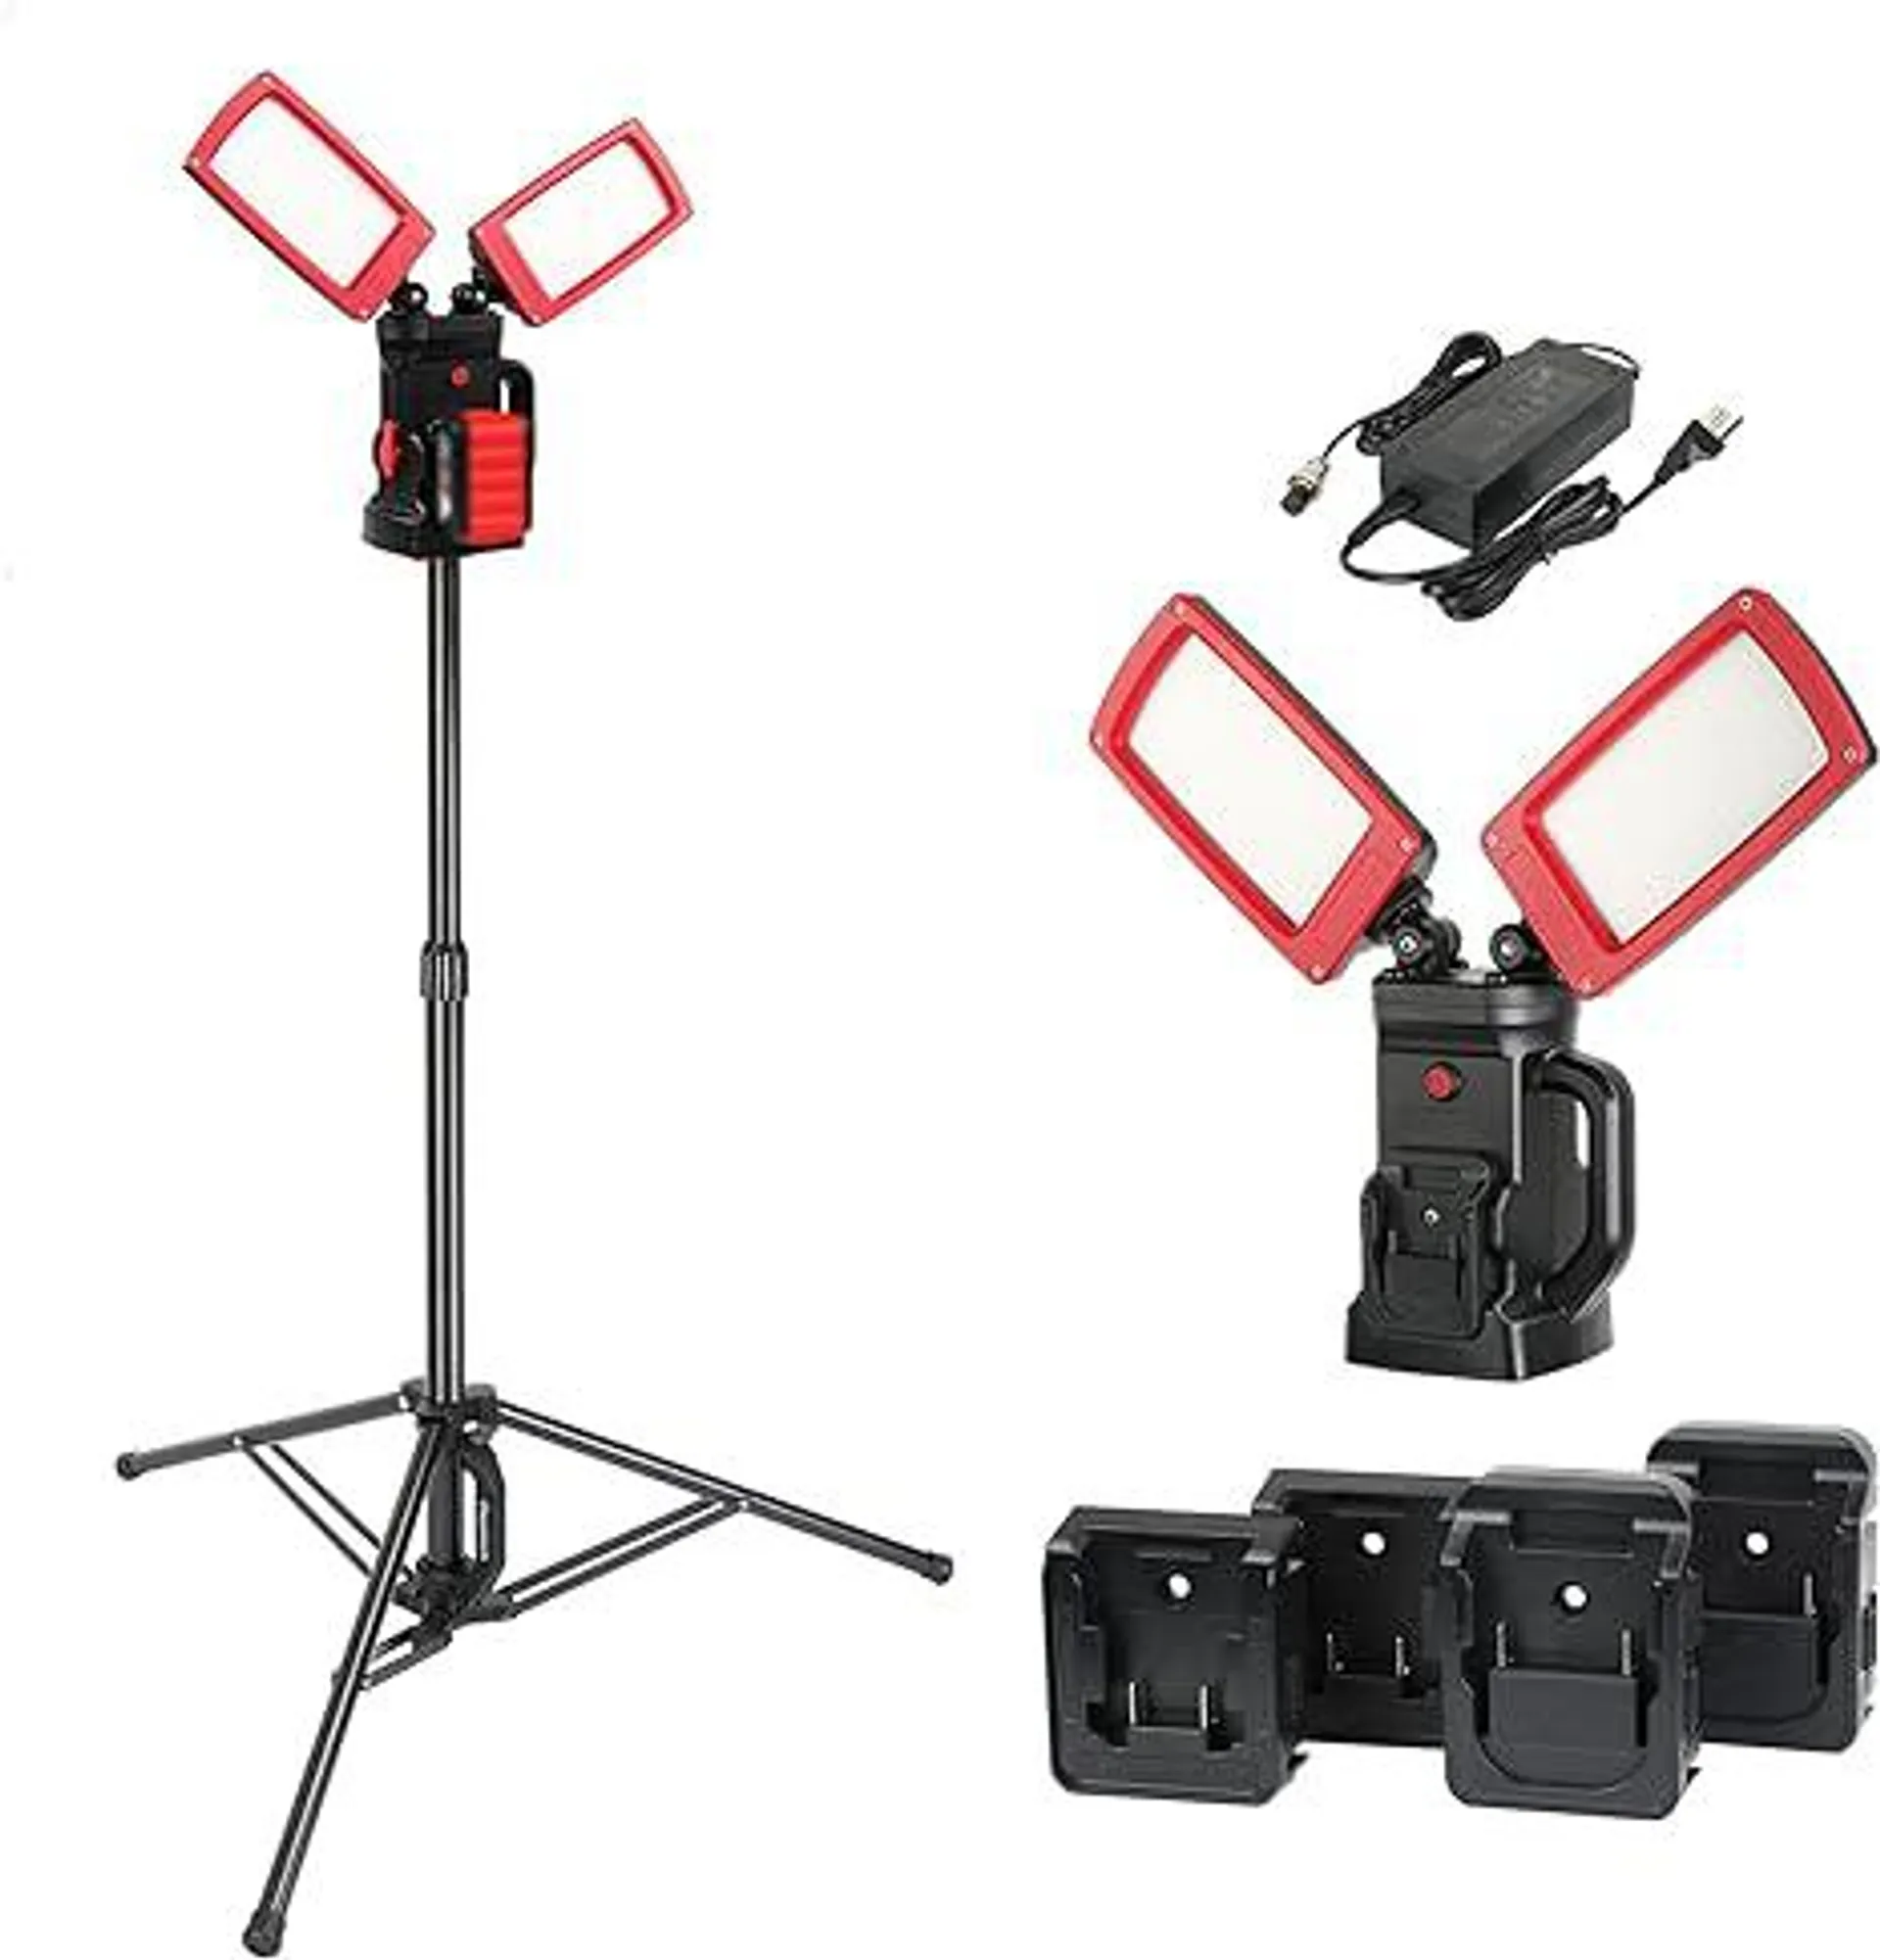 Cordless 12000 Lumen Work Light with Tripod Stand, Compatible with Dewalt, Milwaukee and Makita 18-20v Battery, Brightness Adjustable, Glare and Flicker Free, with Power Charger, Red